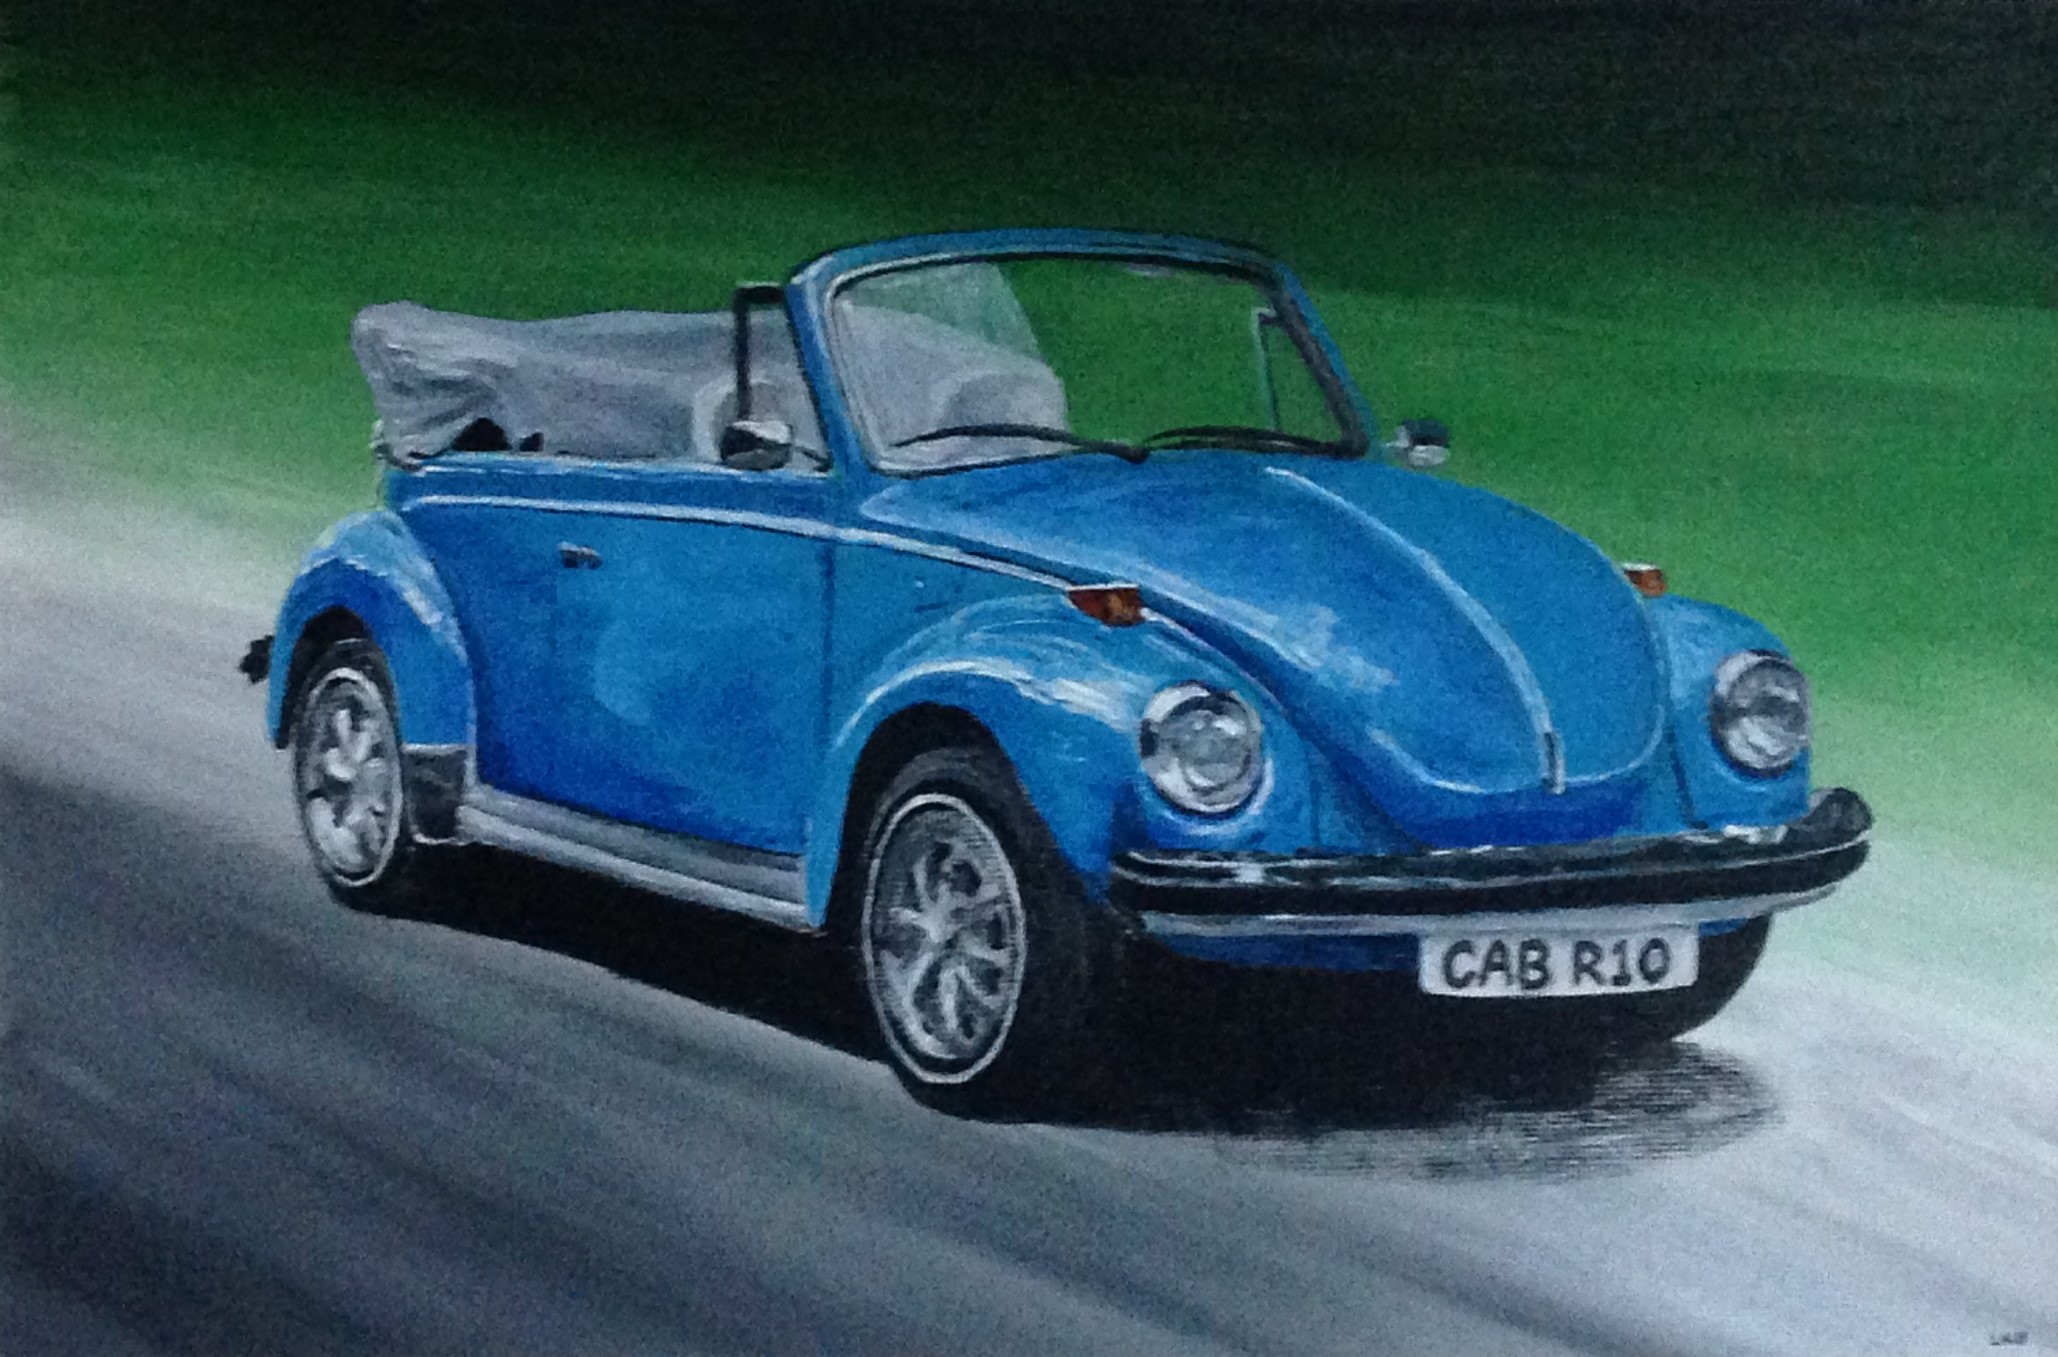 VW Beetle Cabrio pen and ink illustration by Louisa Hill